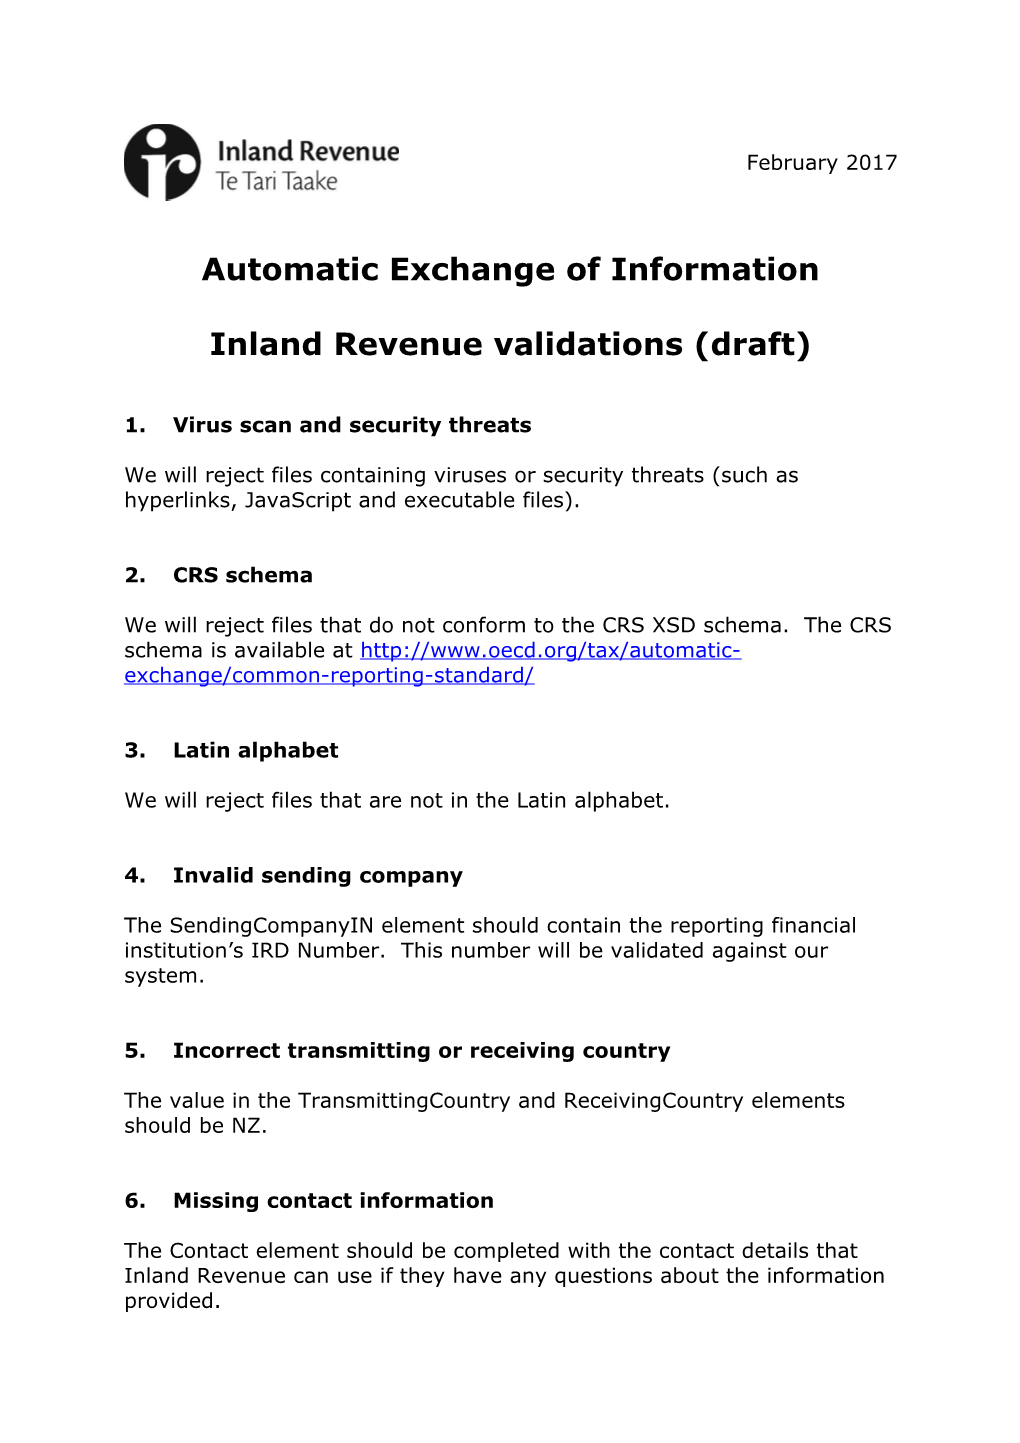 Automatic Exchange of Information - Inland Revenue Validations (Draft) (February 2017)